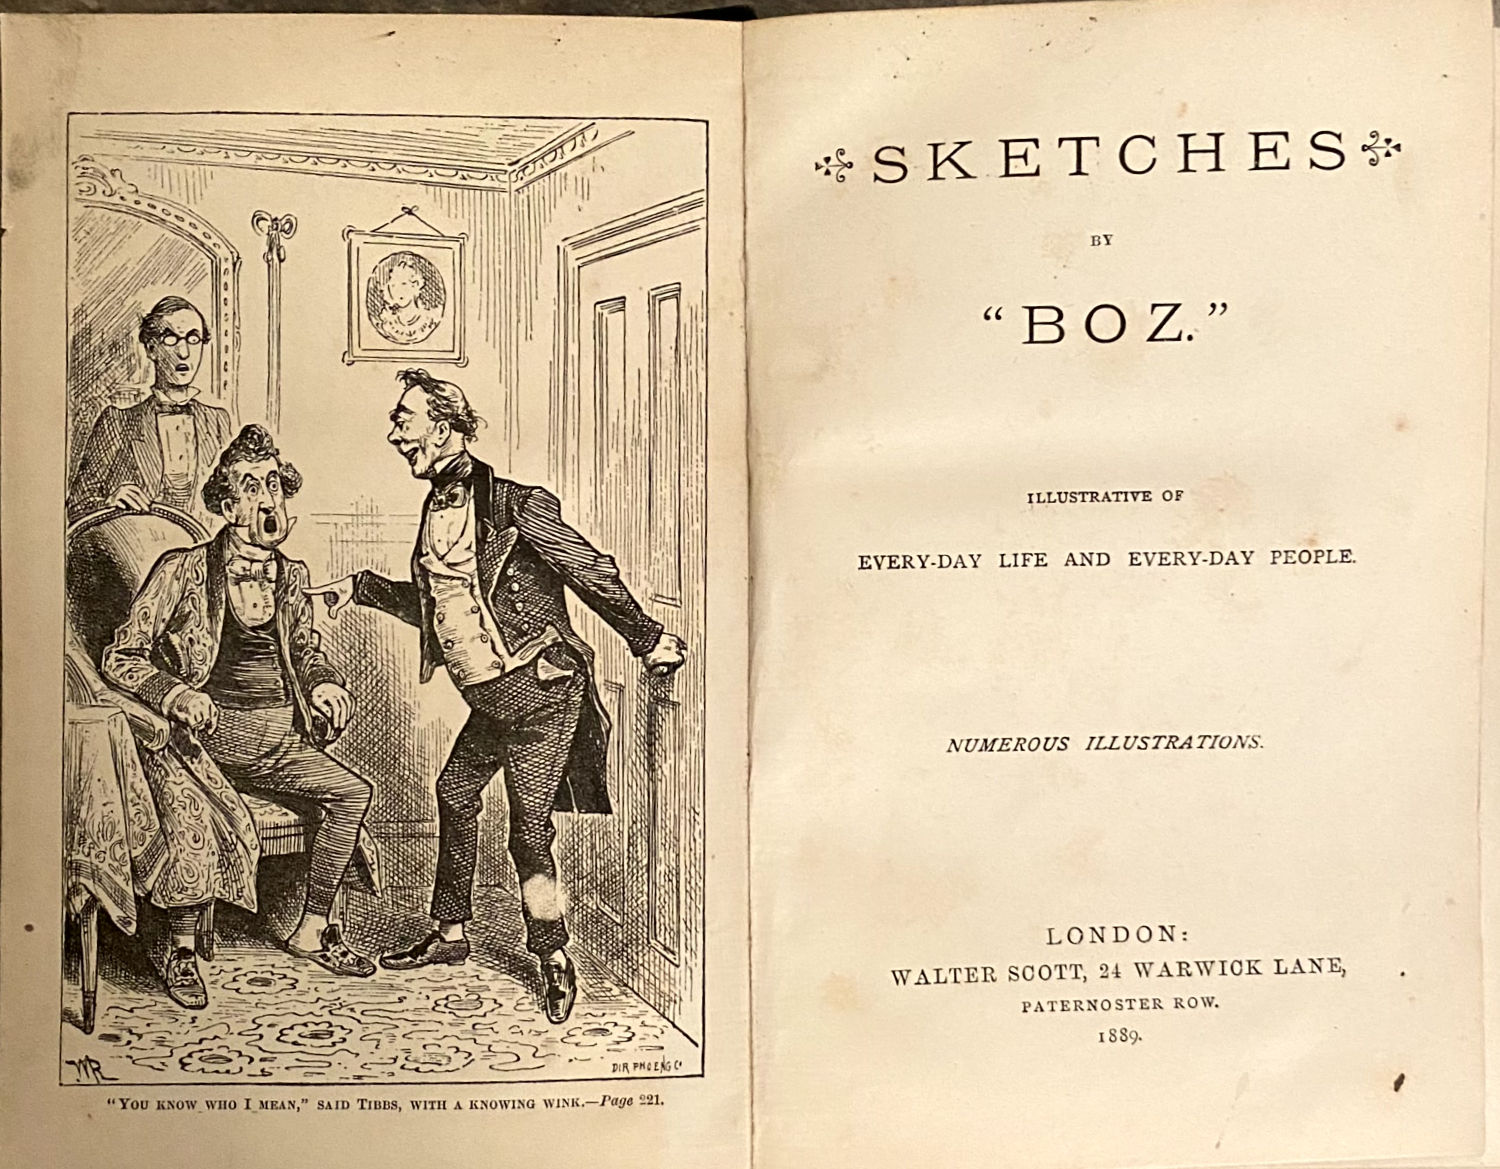 Dickens Sketches by Boz First and Second Series 18361837 first edition   Charles Dickens The Lawrence Drizen Collection  Books  Manuscripts   Sothebys